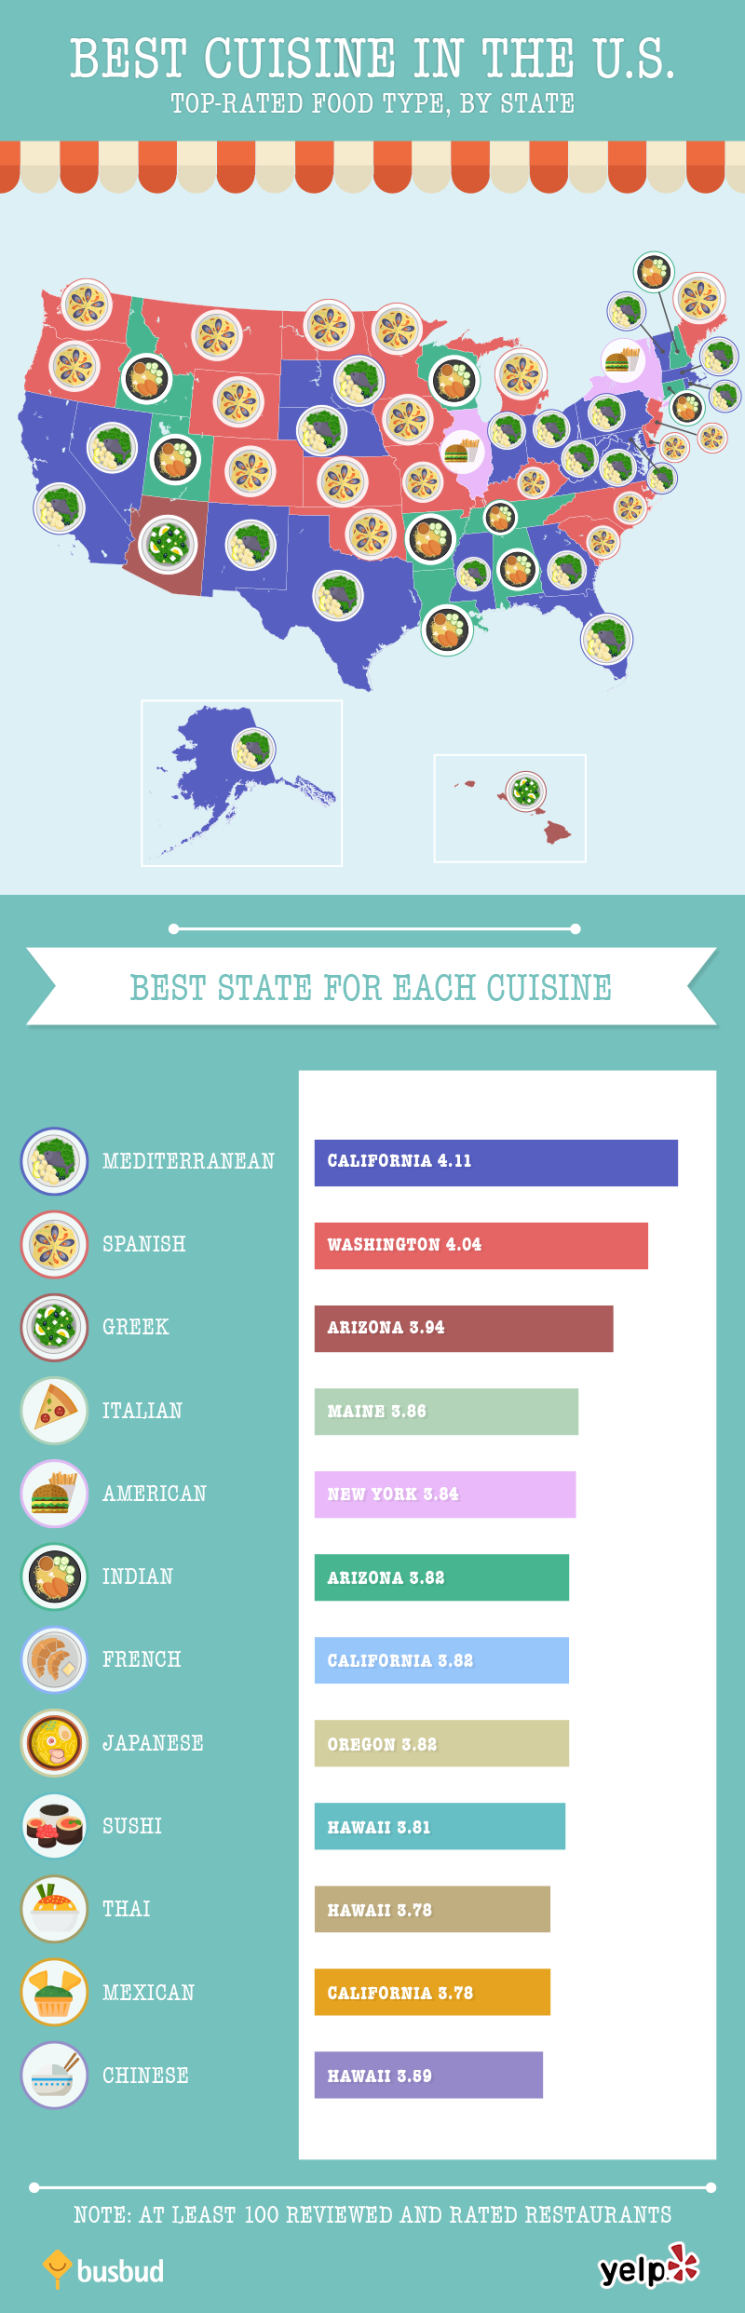 Best Cuisine in the US - top rated food type